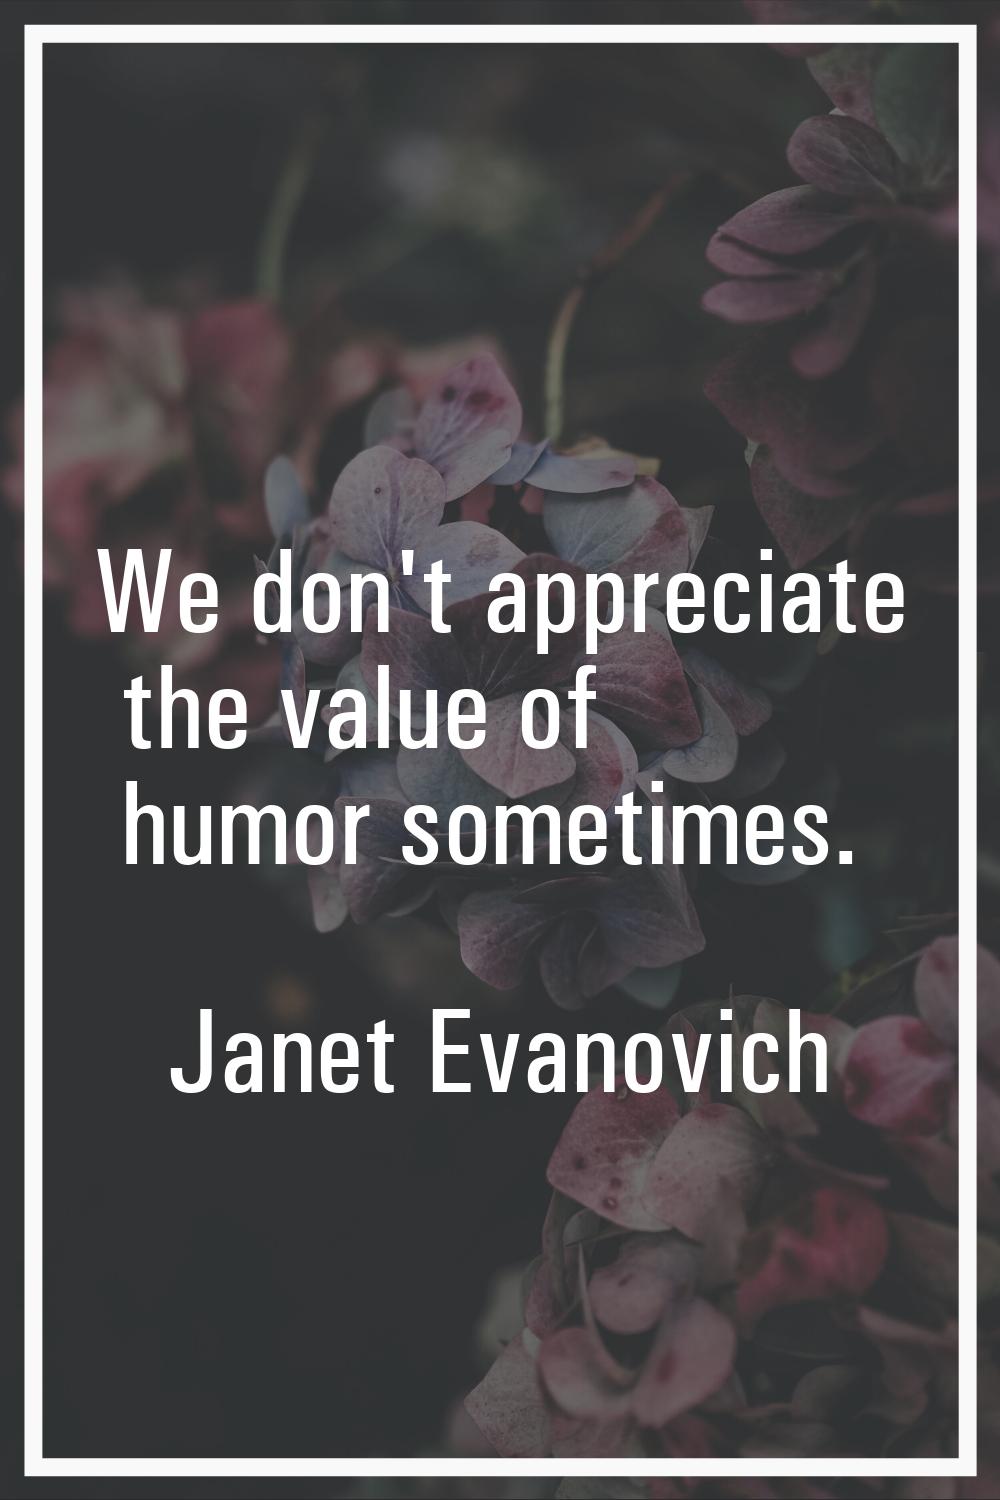 We don't appreciate the value of humor sometimes.